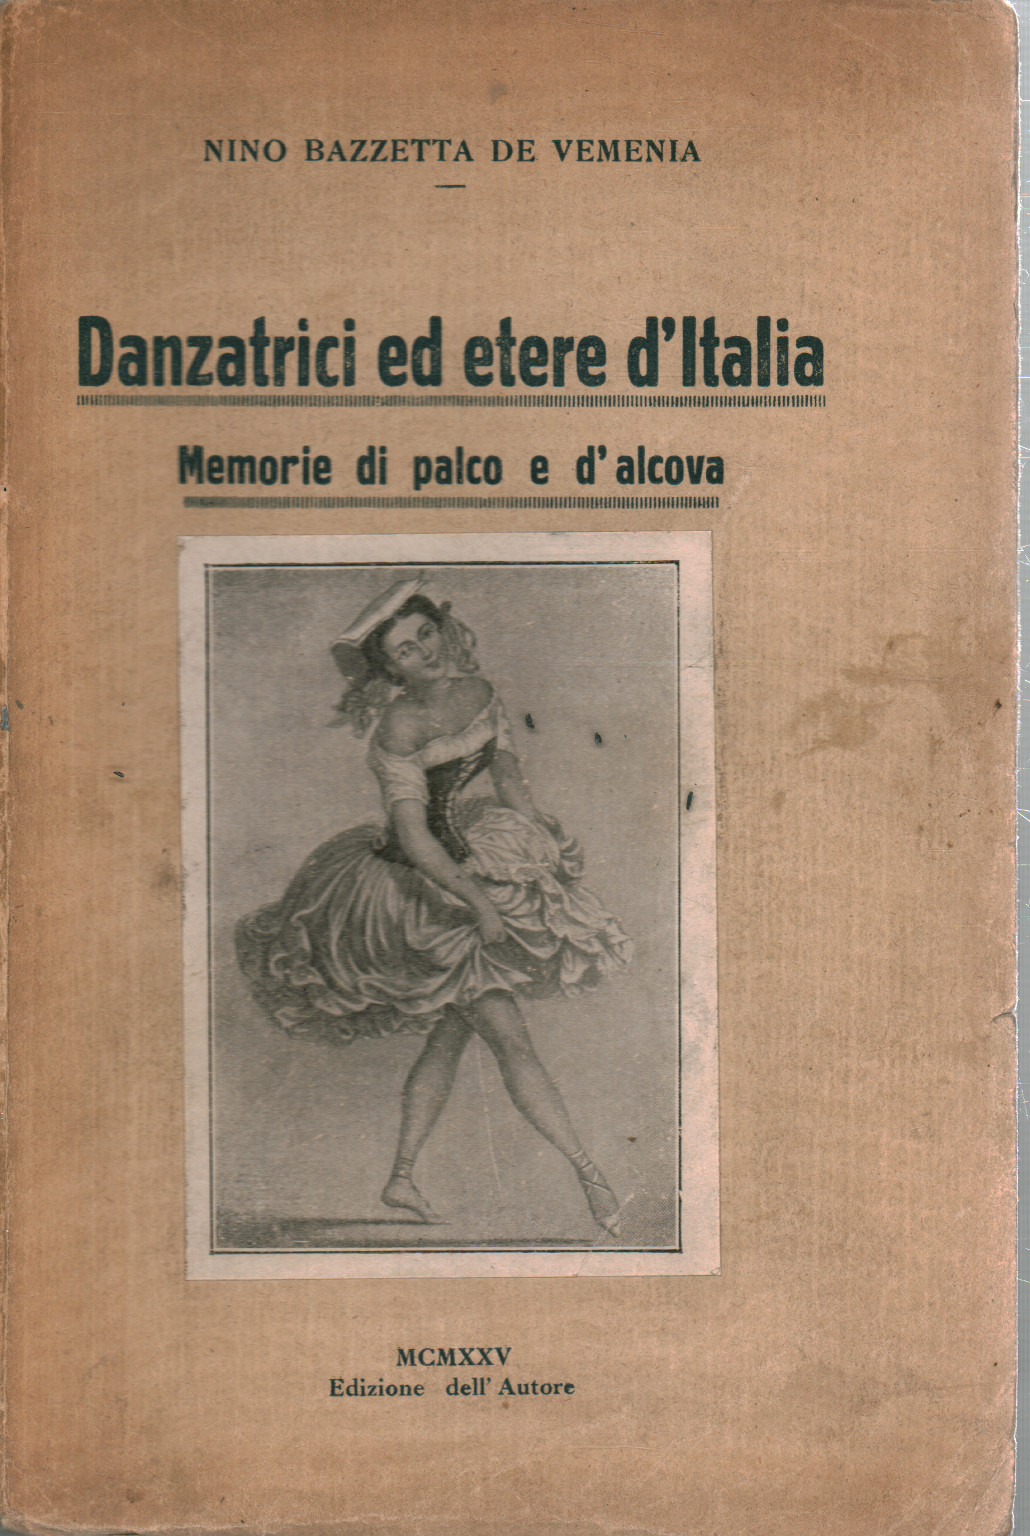 Dancers and ether d'italia, s.a.